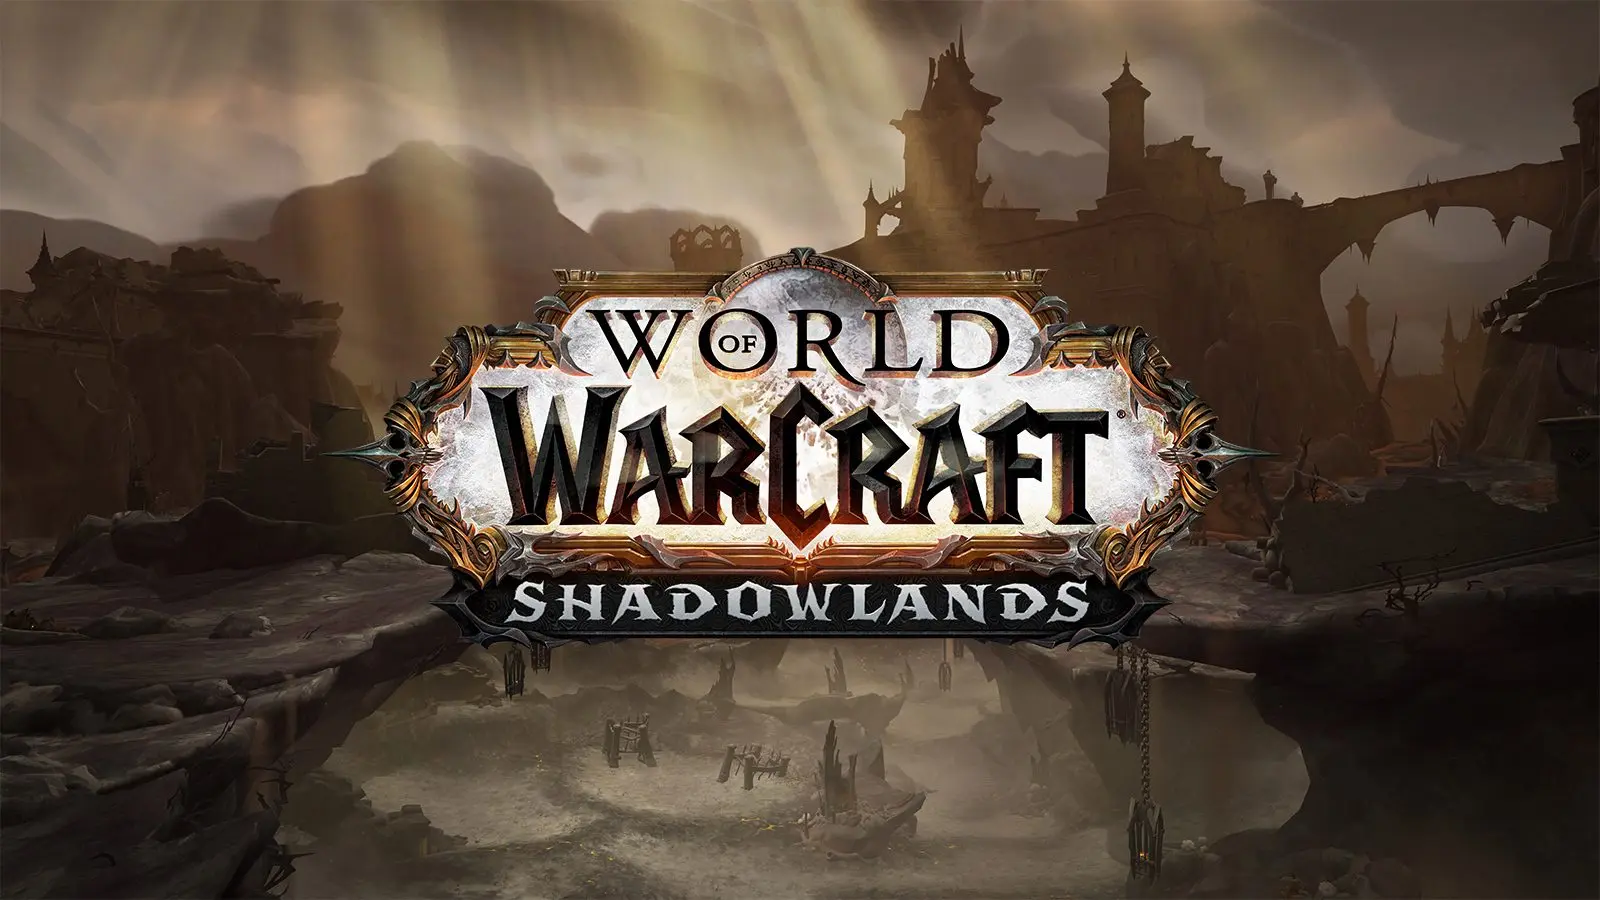 World of Warcraft: Shadowlands will completely change the game